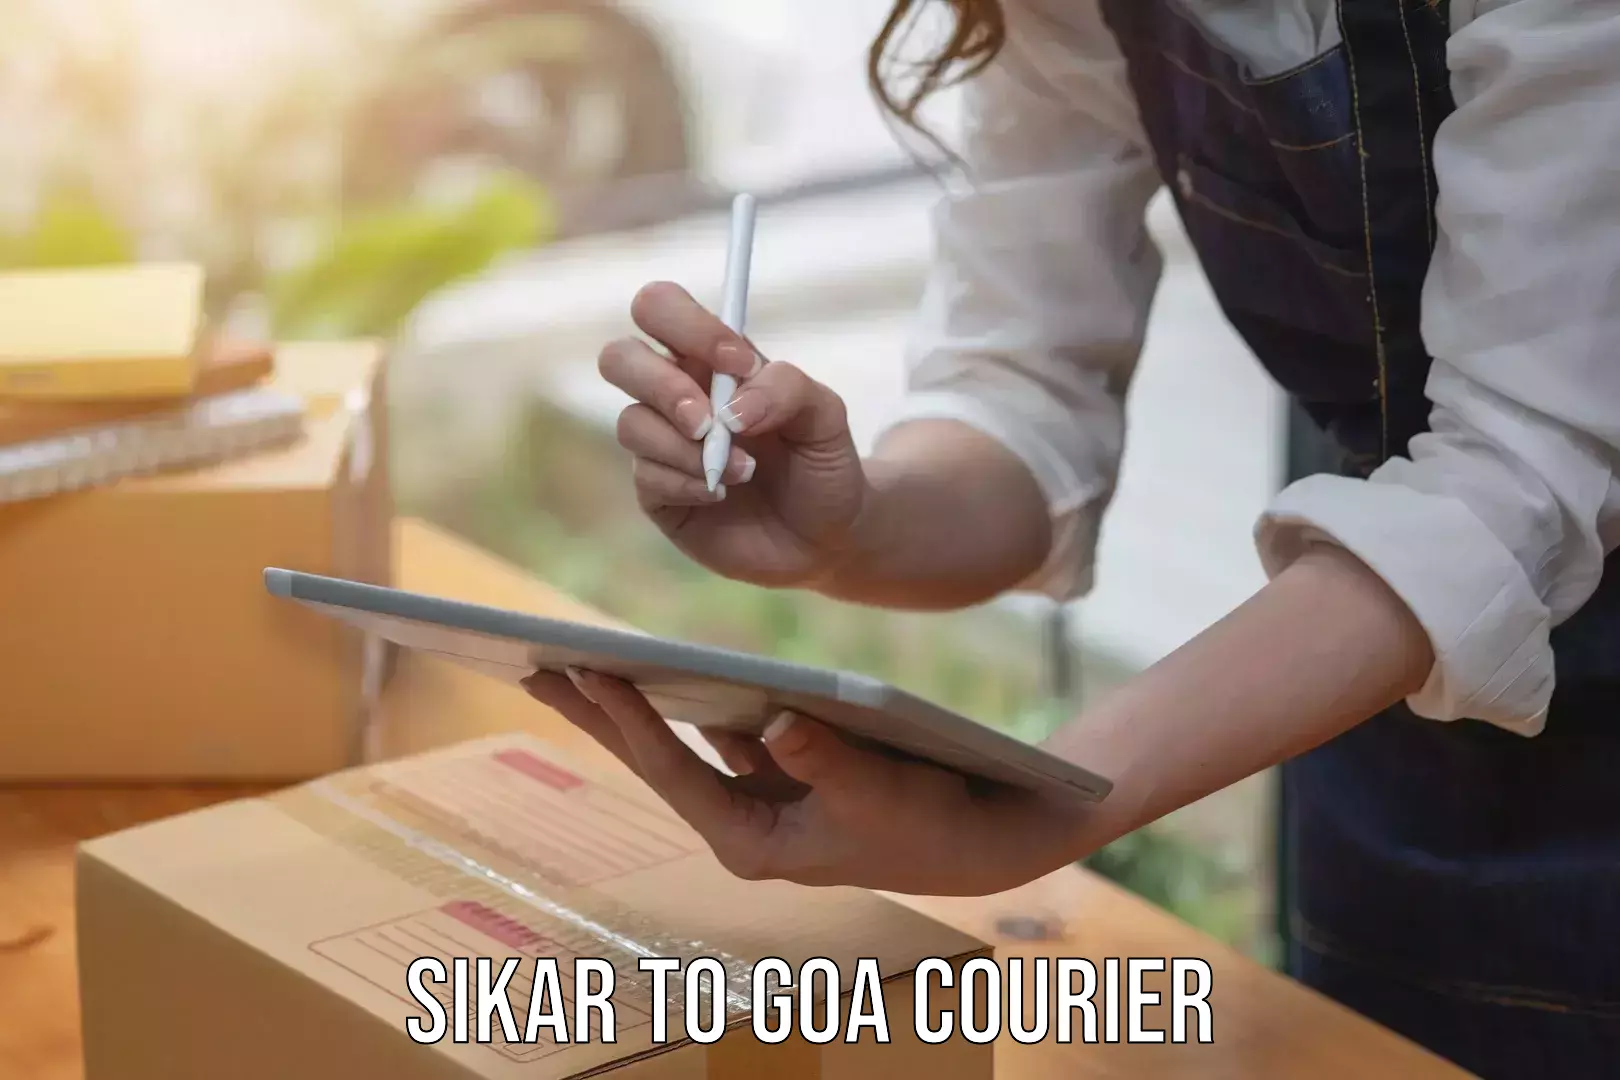 Efficient courier operations Sikar to Panaji